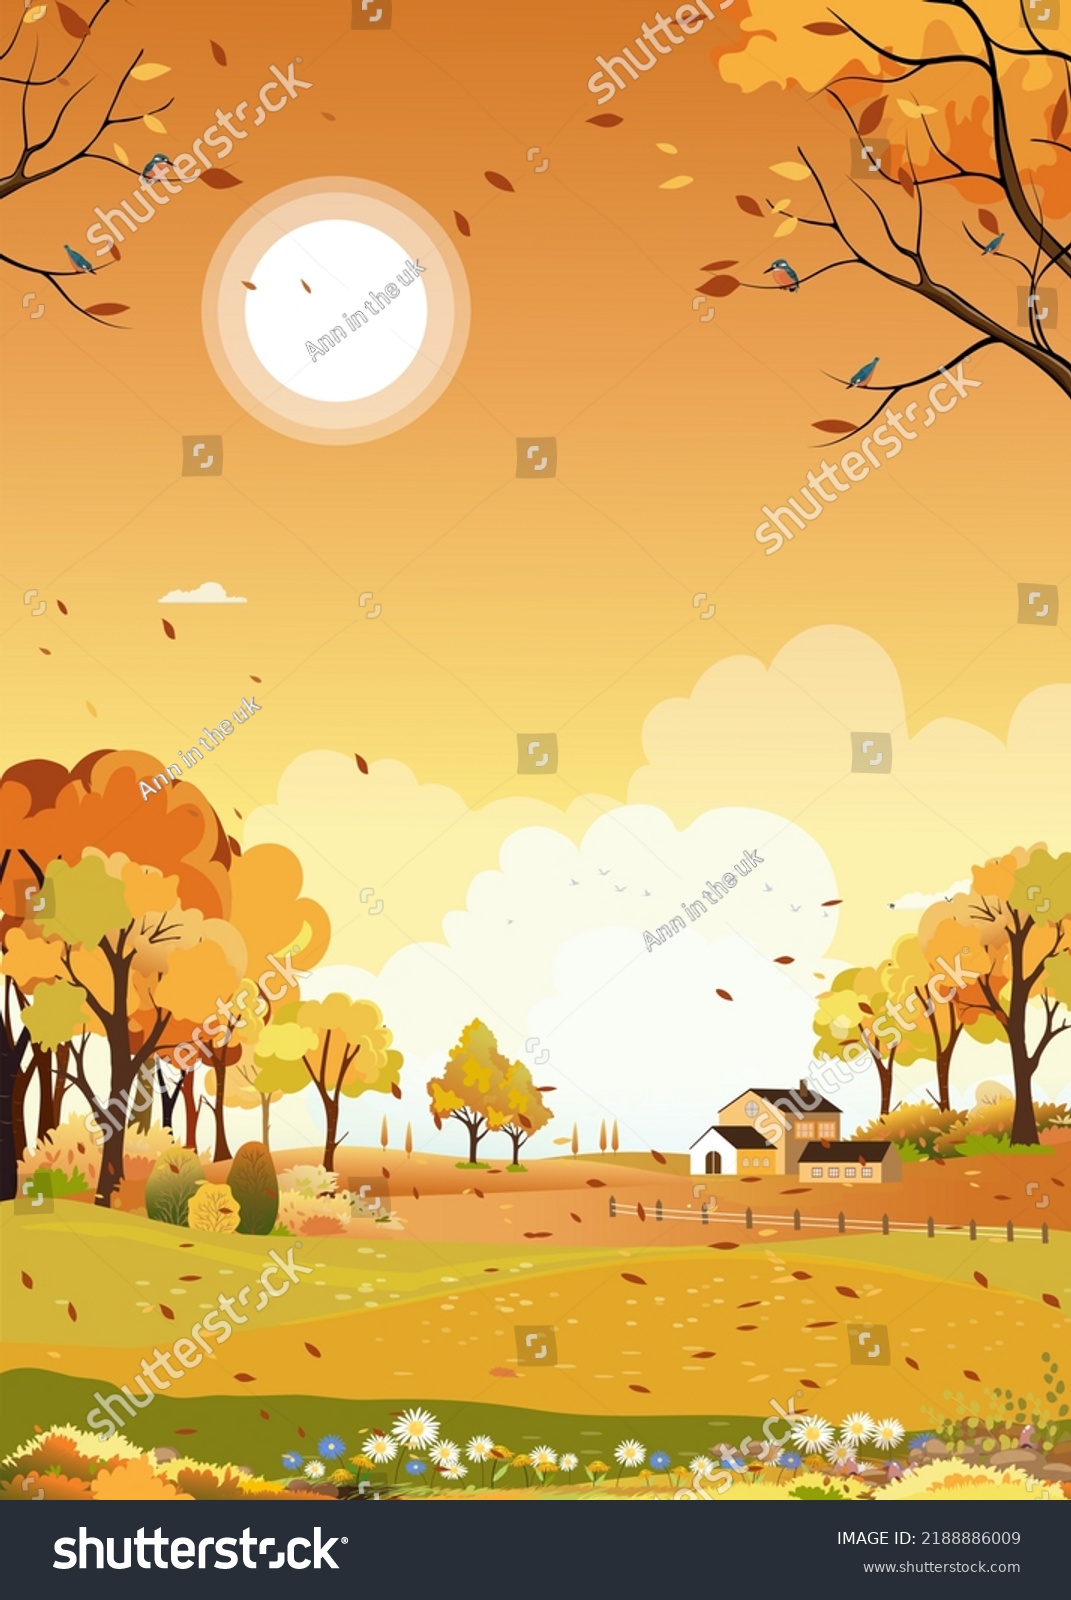 Autumn Landscape Background,Vector cartoon in Village Fall season forest tree with meadow flower and orange sunset sky,Illustration banner of farmland with cloud and sun over maintain  #2188886009